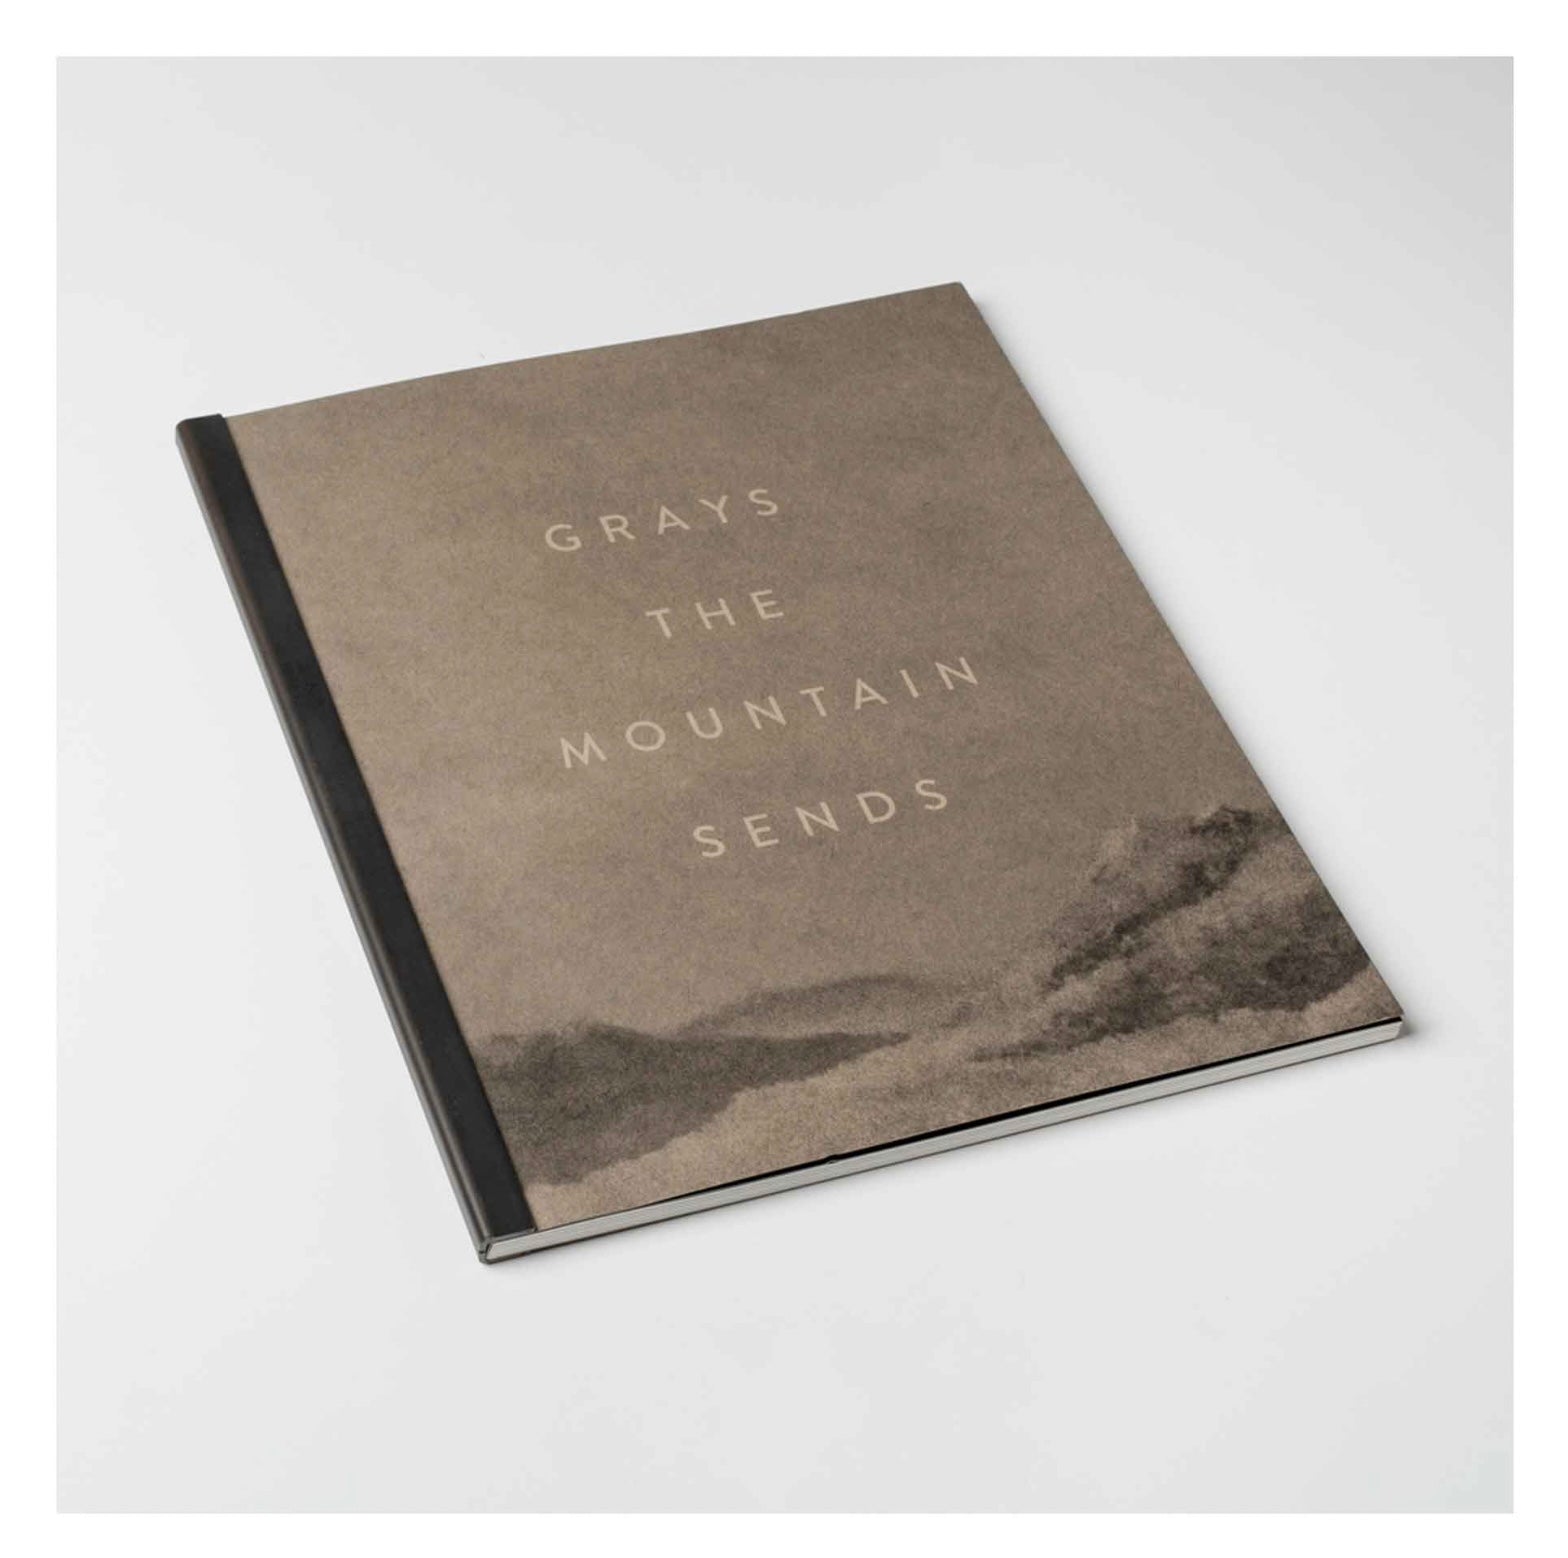 Grays the Mountain sends - first edition, signed